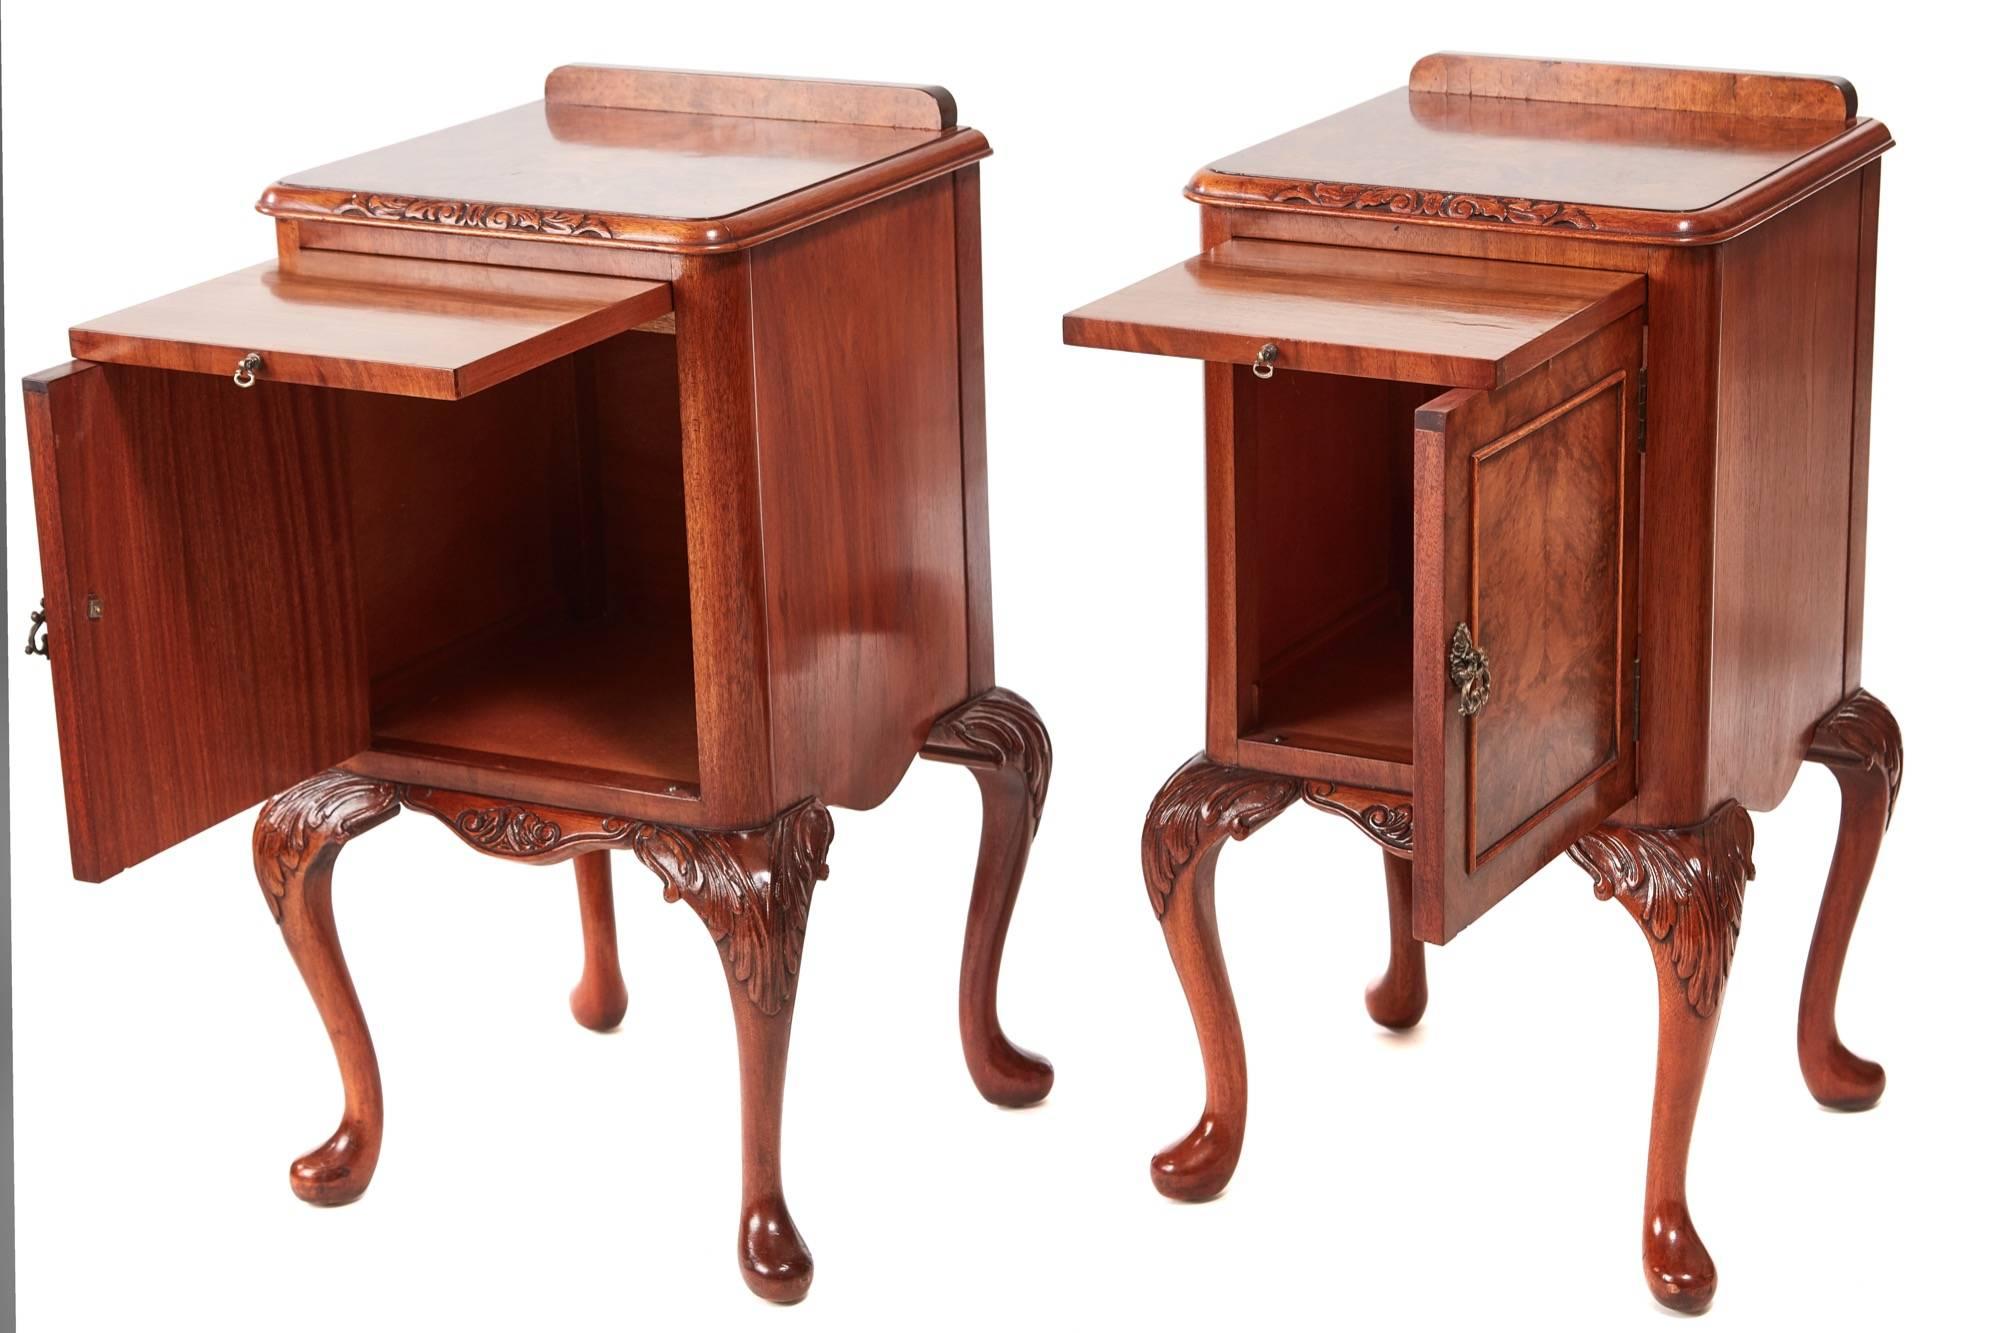 Fine pair of burr walnut bedside cabinets, with fantastic burr walnut tops, nice carved edge, pull-out slides, burr walnut doors with original brass handles, standing on solid carved walnut cabriole legs
Fantastic color and condition.